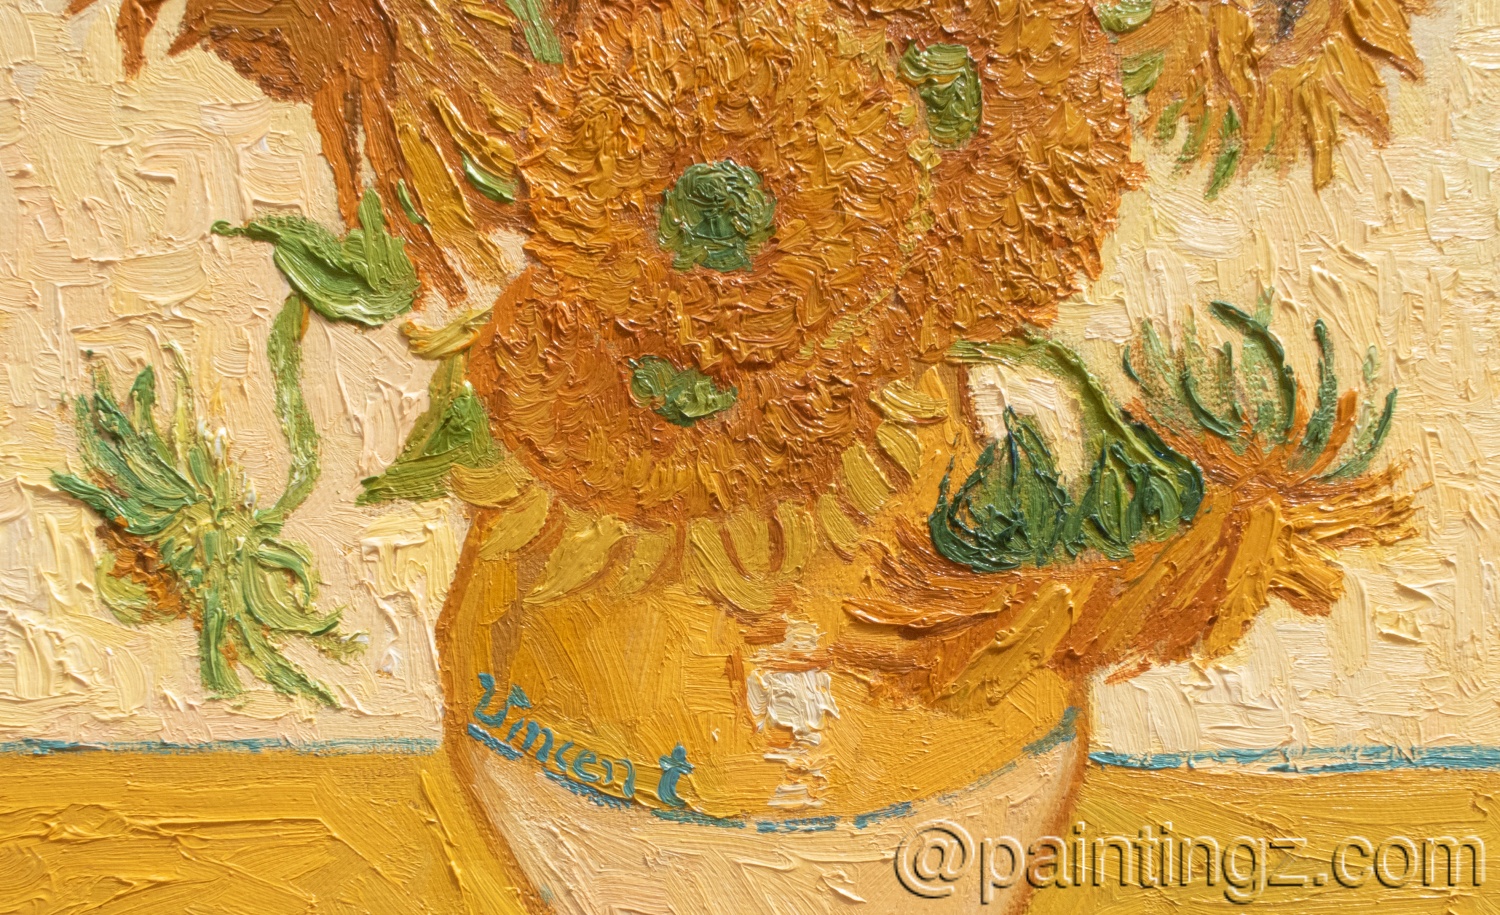 Details in the Reproduction Painting of Van Gogh's Sunflowers 